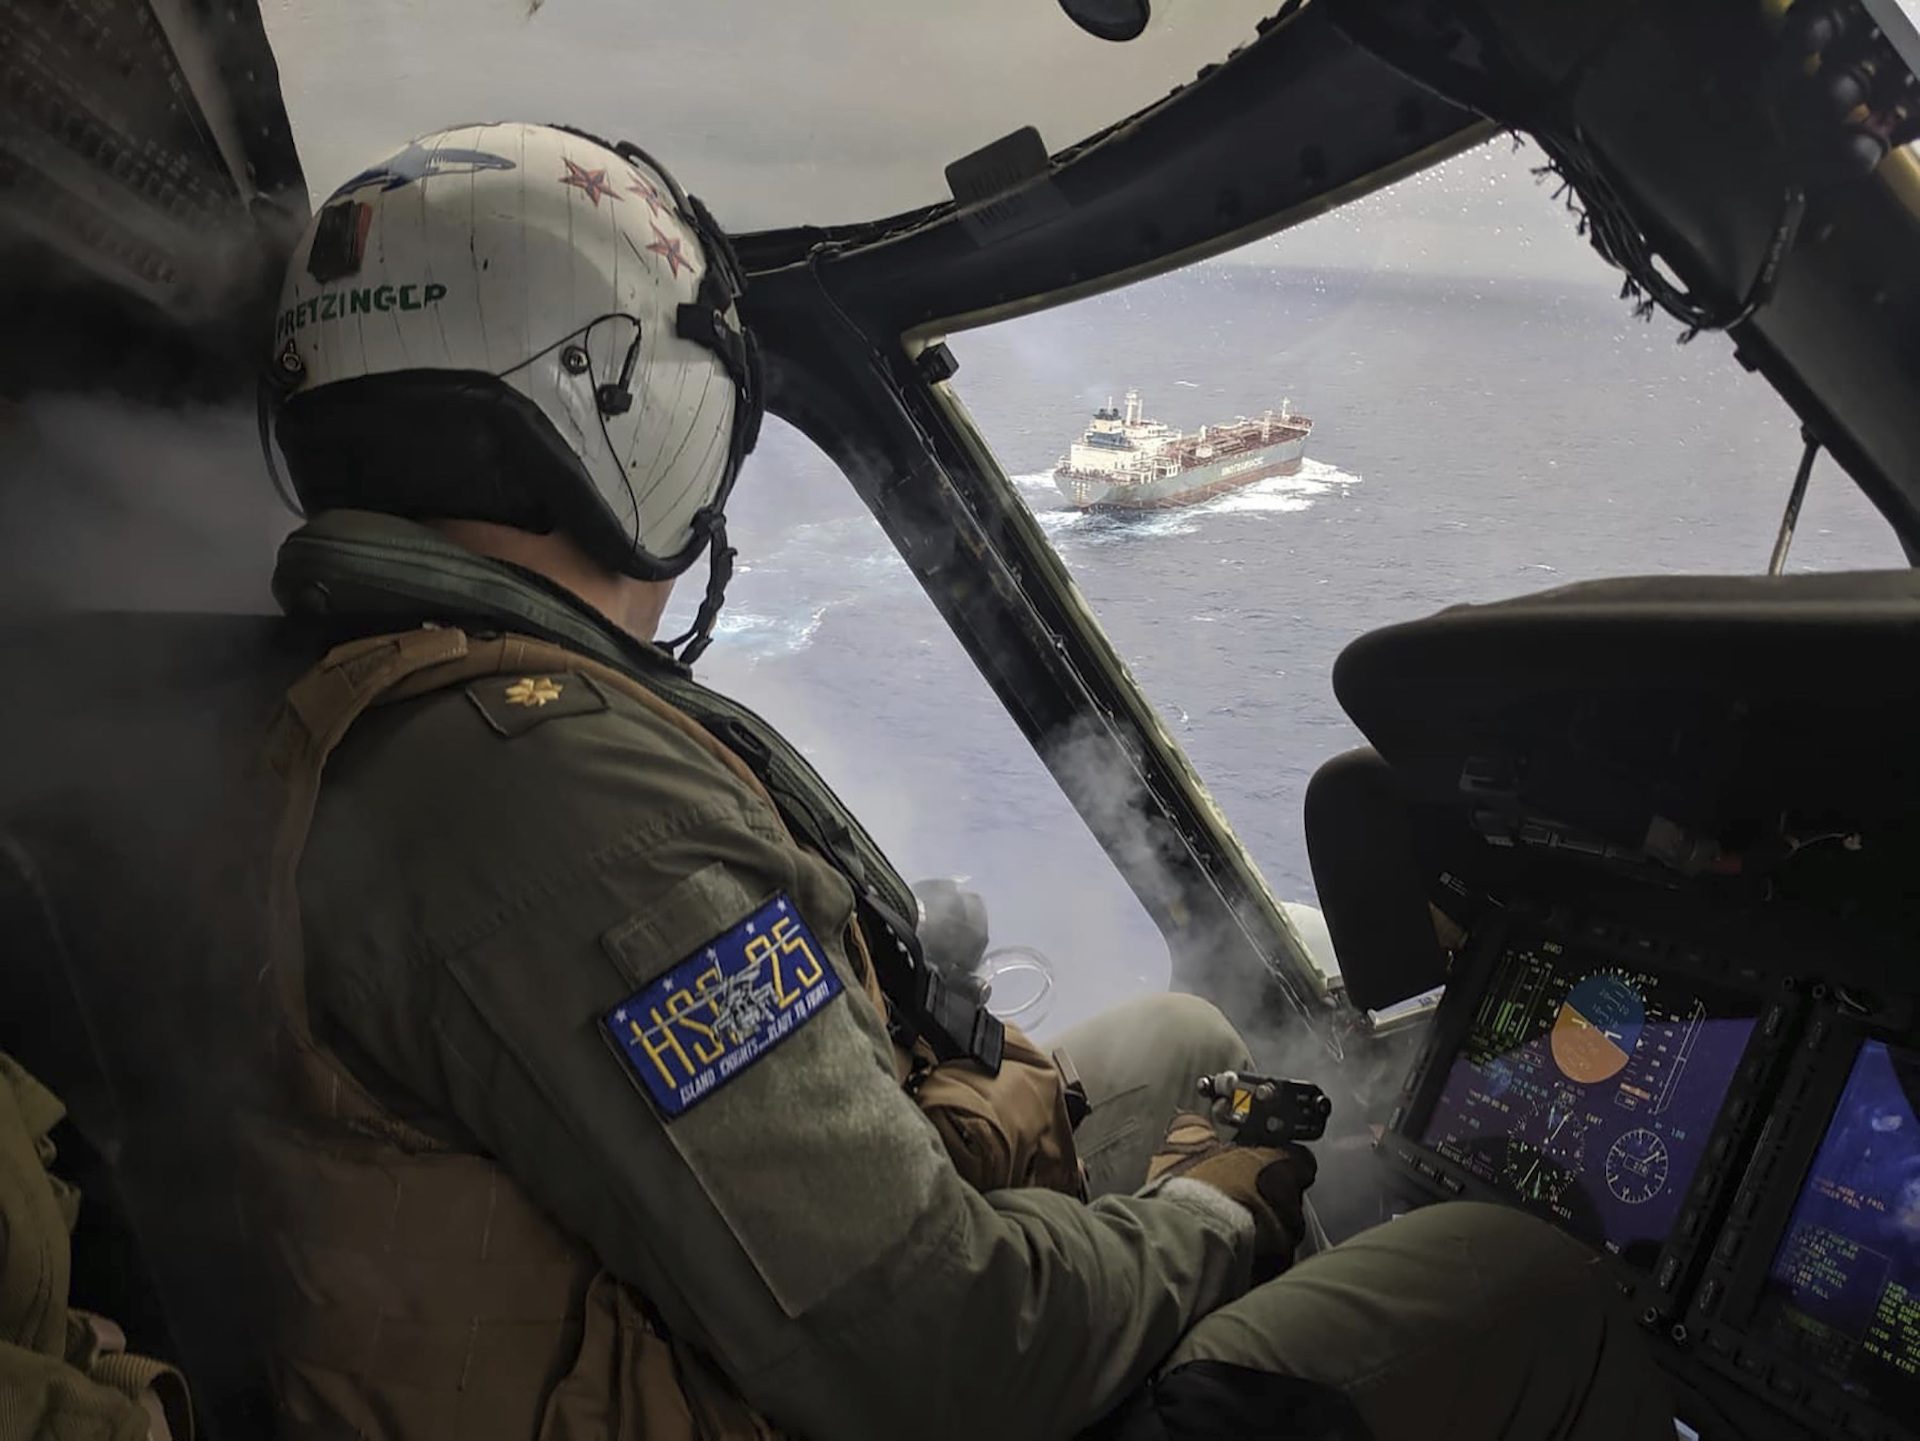 This photo provided by the U.S. Navy on Aug. 6, 2019, Lt. Cmdr. Philip Pretzinger, from Dayton, Ohio, approaches the civilian oil tanker CSC Brave during a medical evacuation mission by the "Island Knights" of Helicopter Sea Combat Squadron (HSC) 25. HSC-25 provides a multi-mission rotary wing capability for units in the U.S. 7th Fleet area of operations and maintains a Guam-based 24-hour search and rescue and medical evacuation capability.